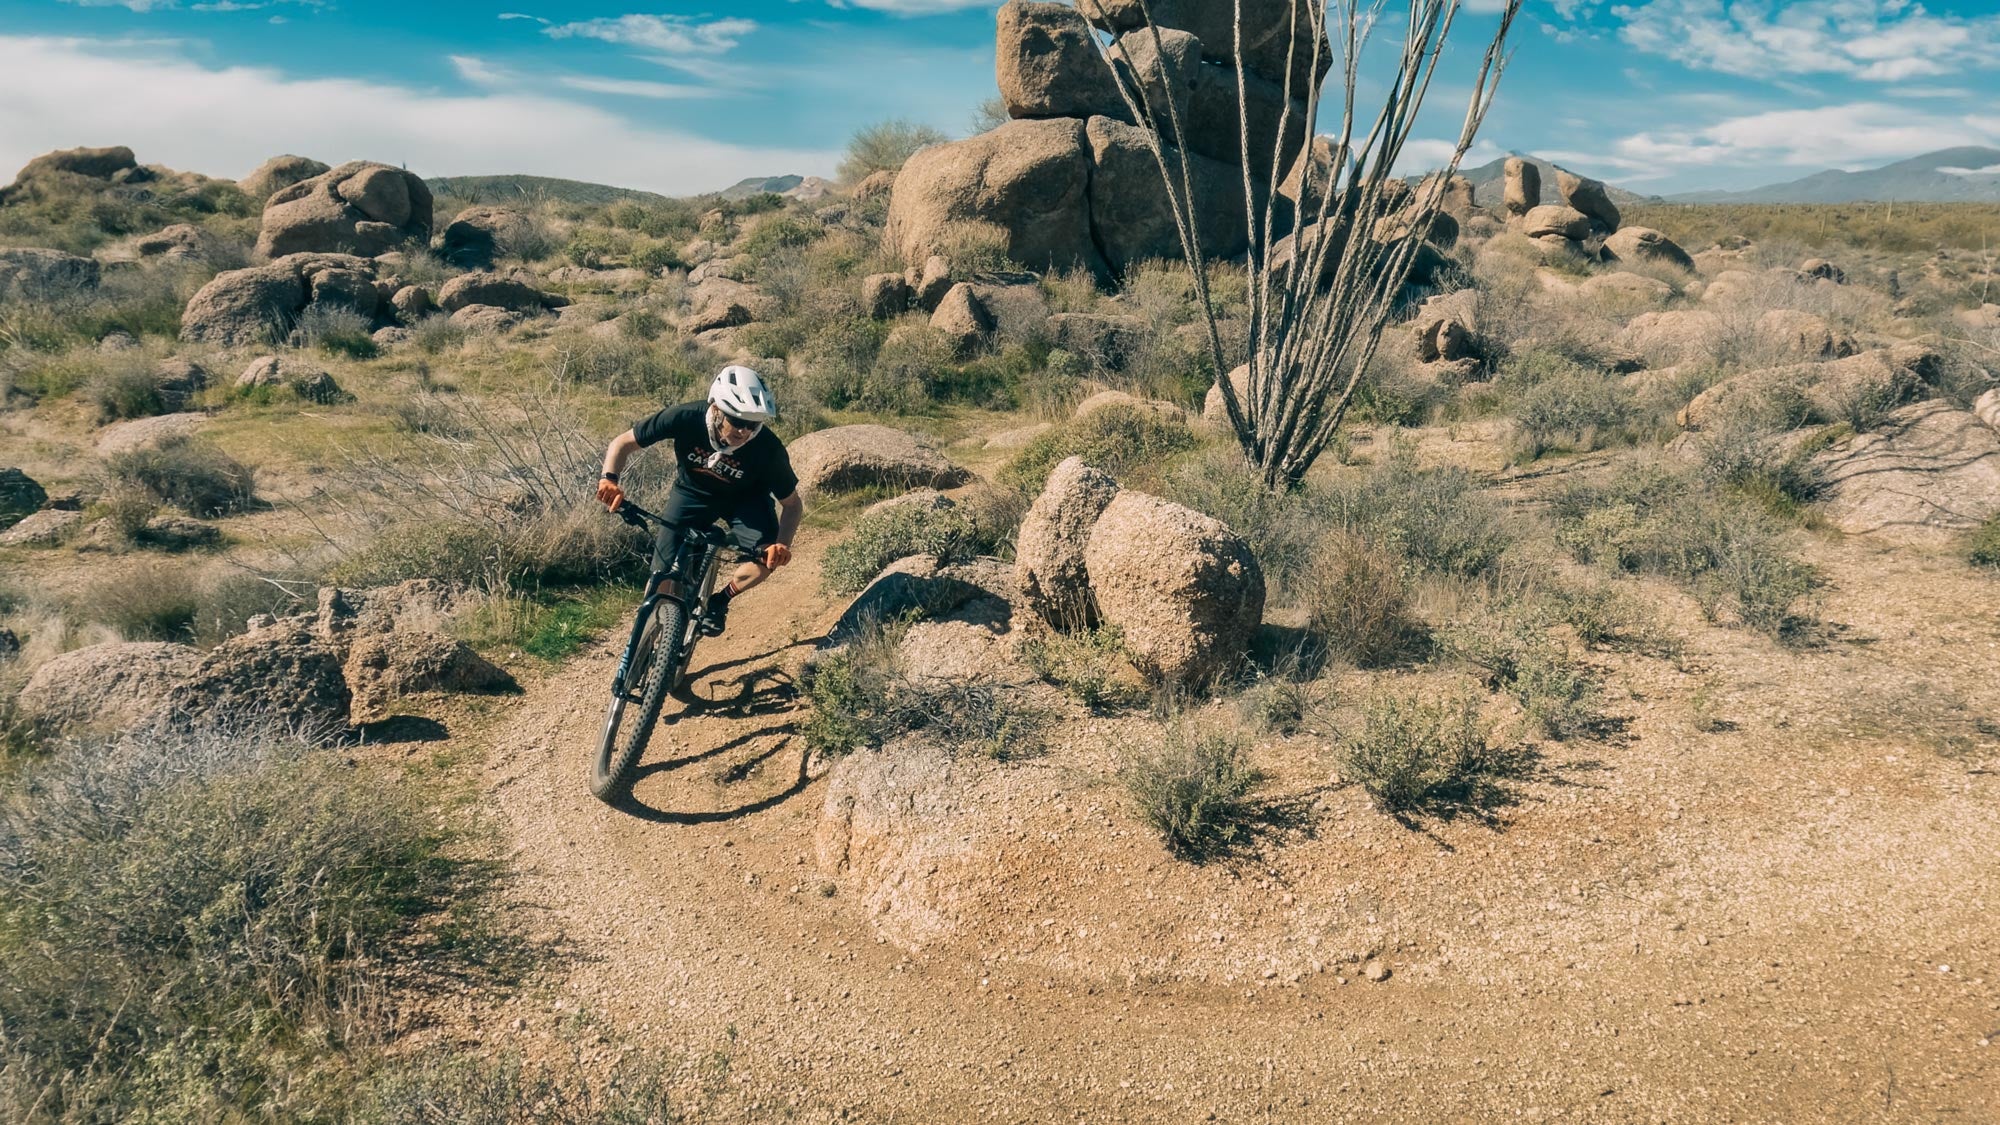 Load video: highlight video of mountain biker riding in Orange County, Sedona, and Scottsdale, AZ